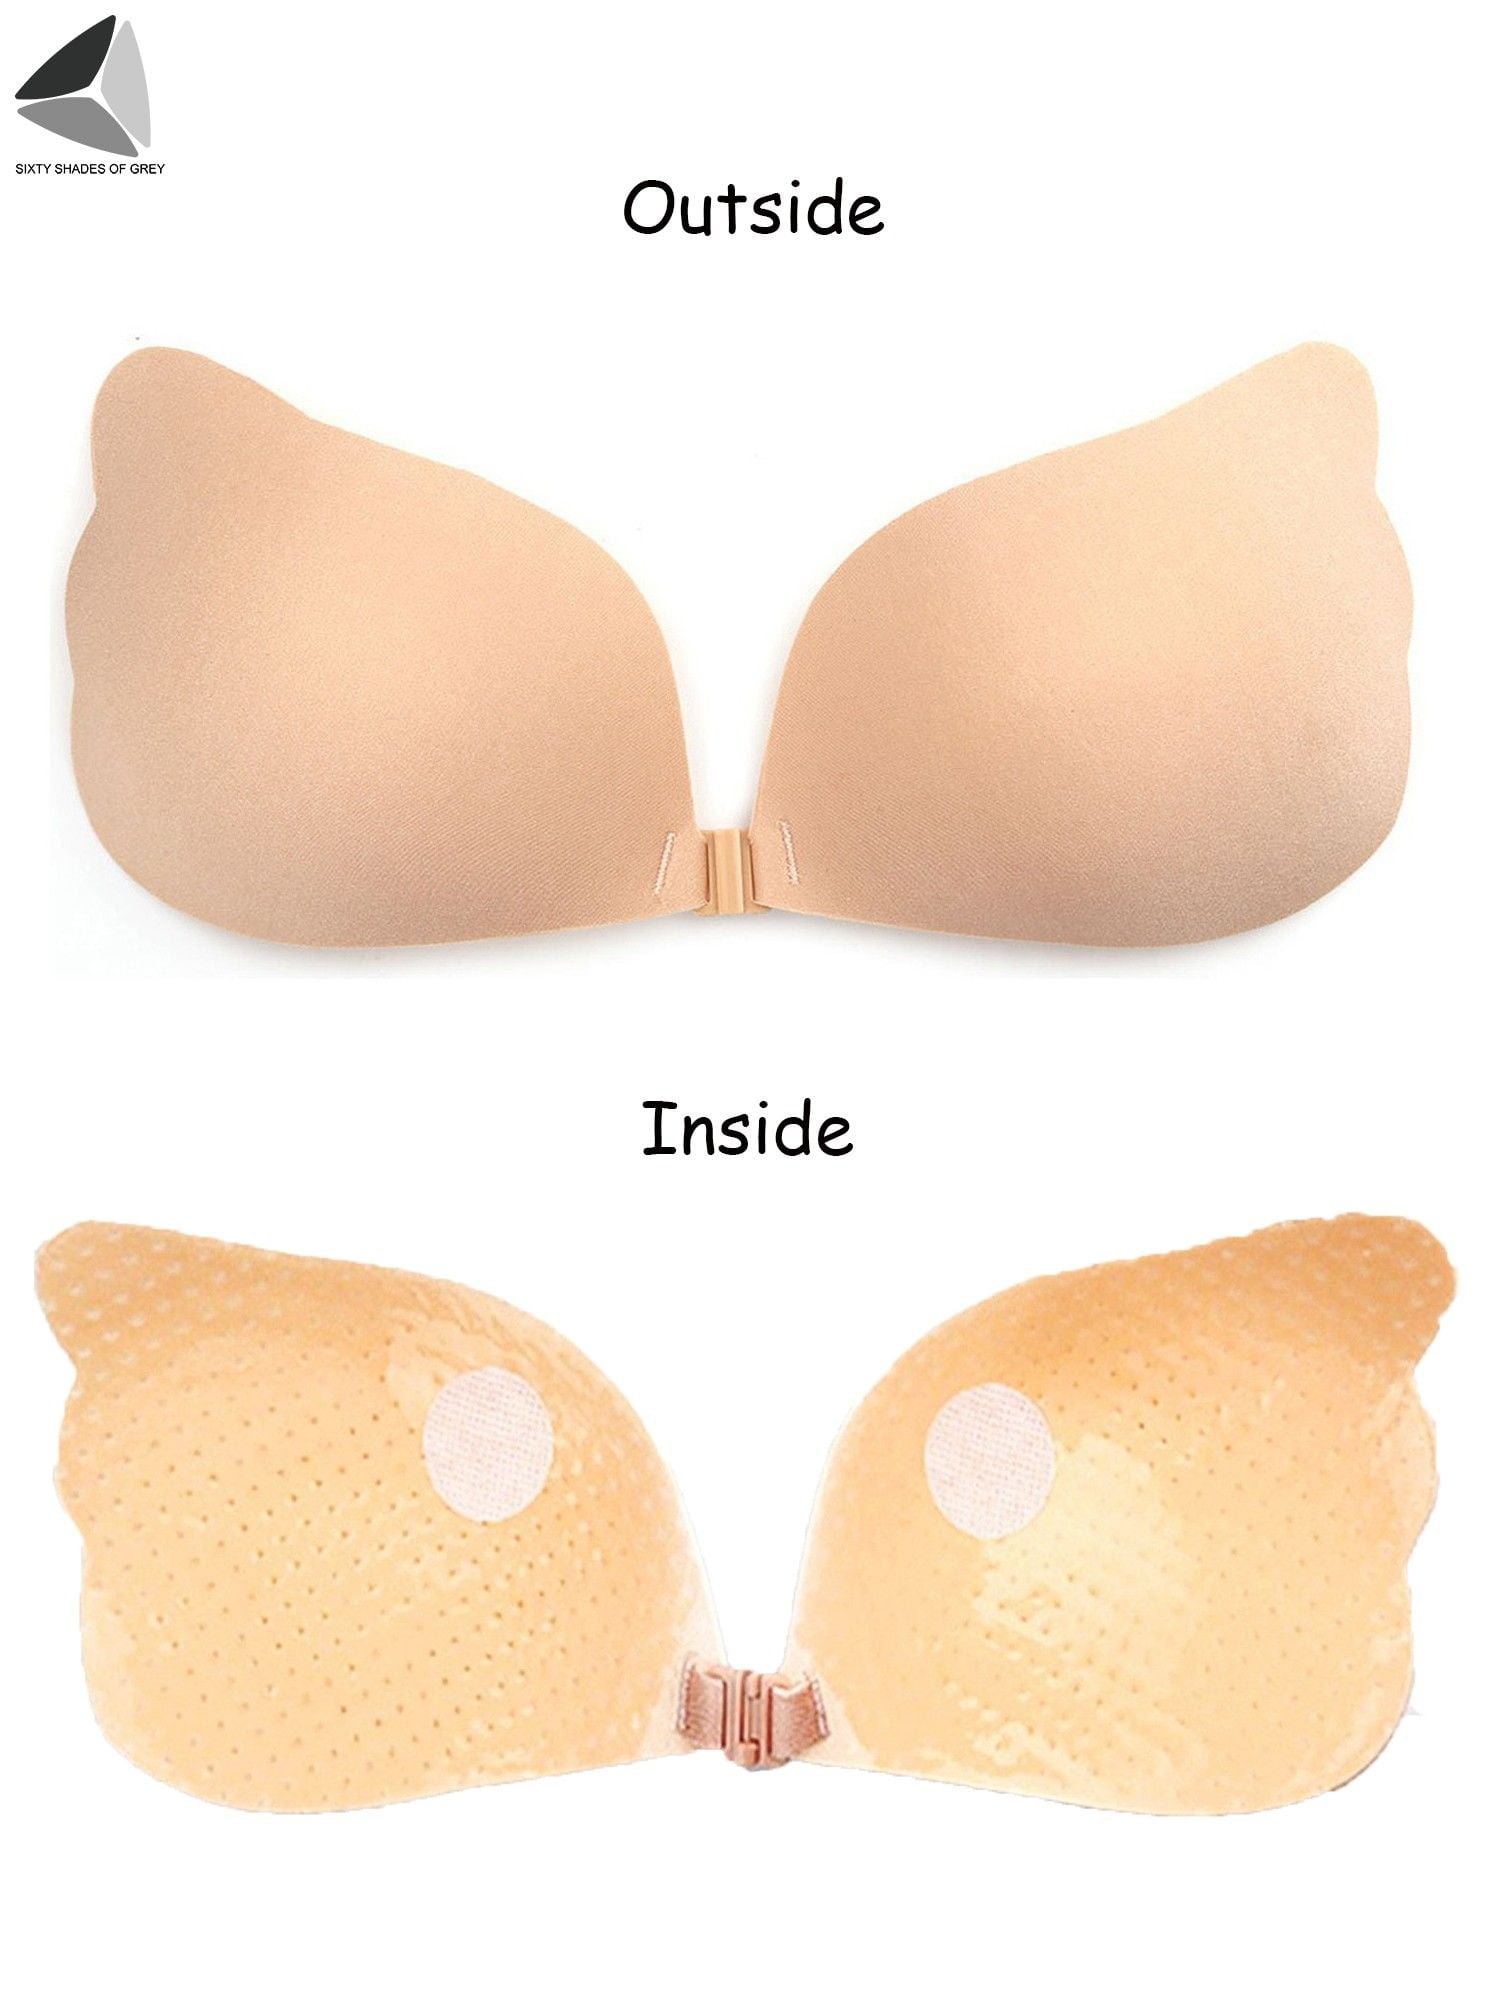 Women Invisible Bras Butterfly Wing Silicone Sexy Bra Adhesive